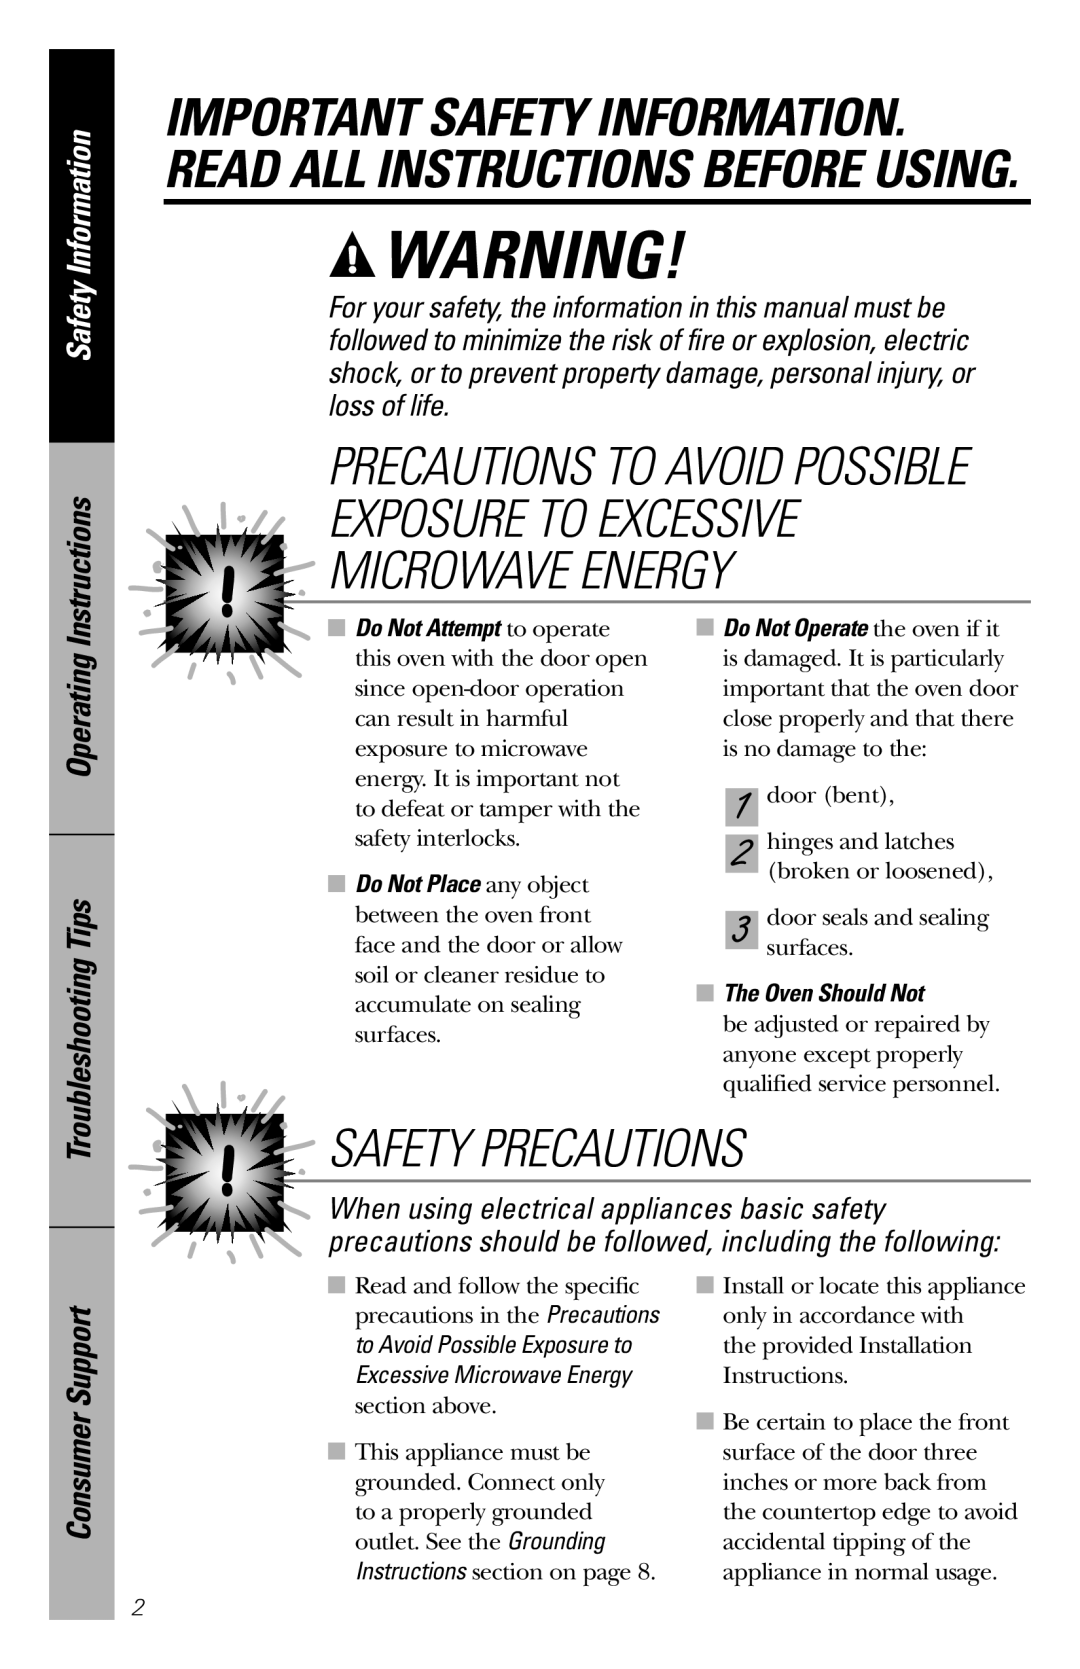 GE JES1039 Safety Precautions, Safety Information, Instructions, Operating Troubleshooting Tips, Consumer Support 